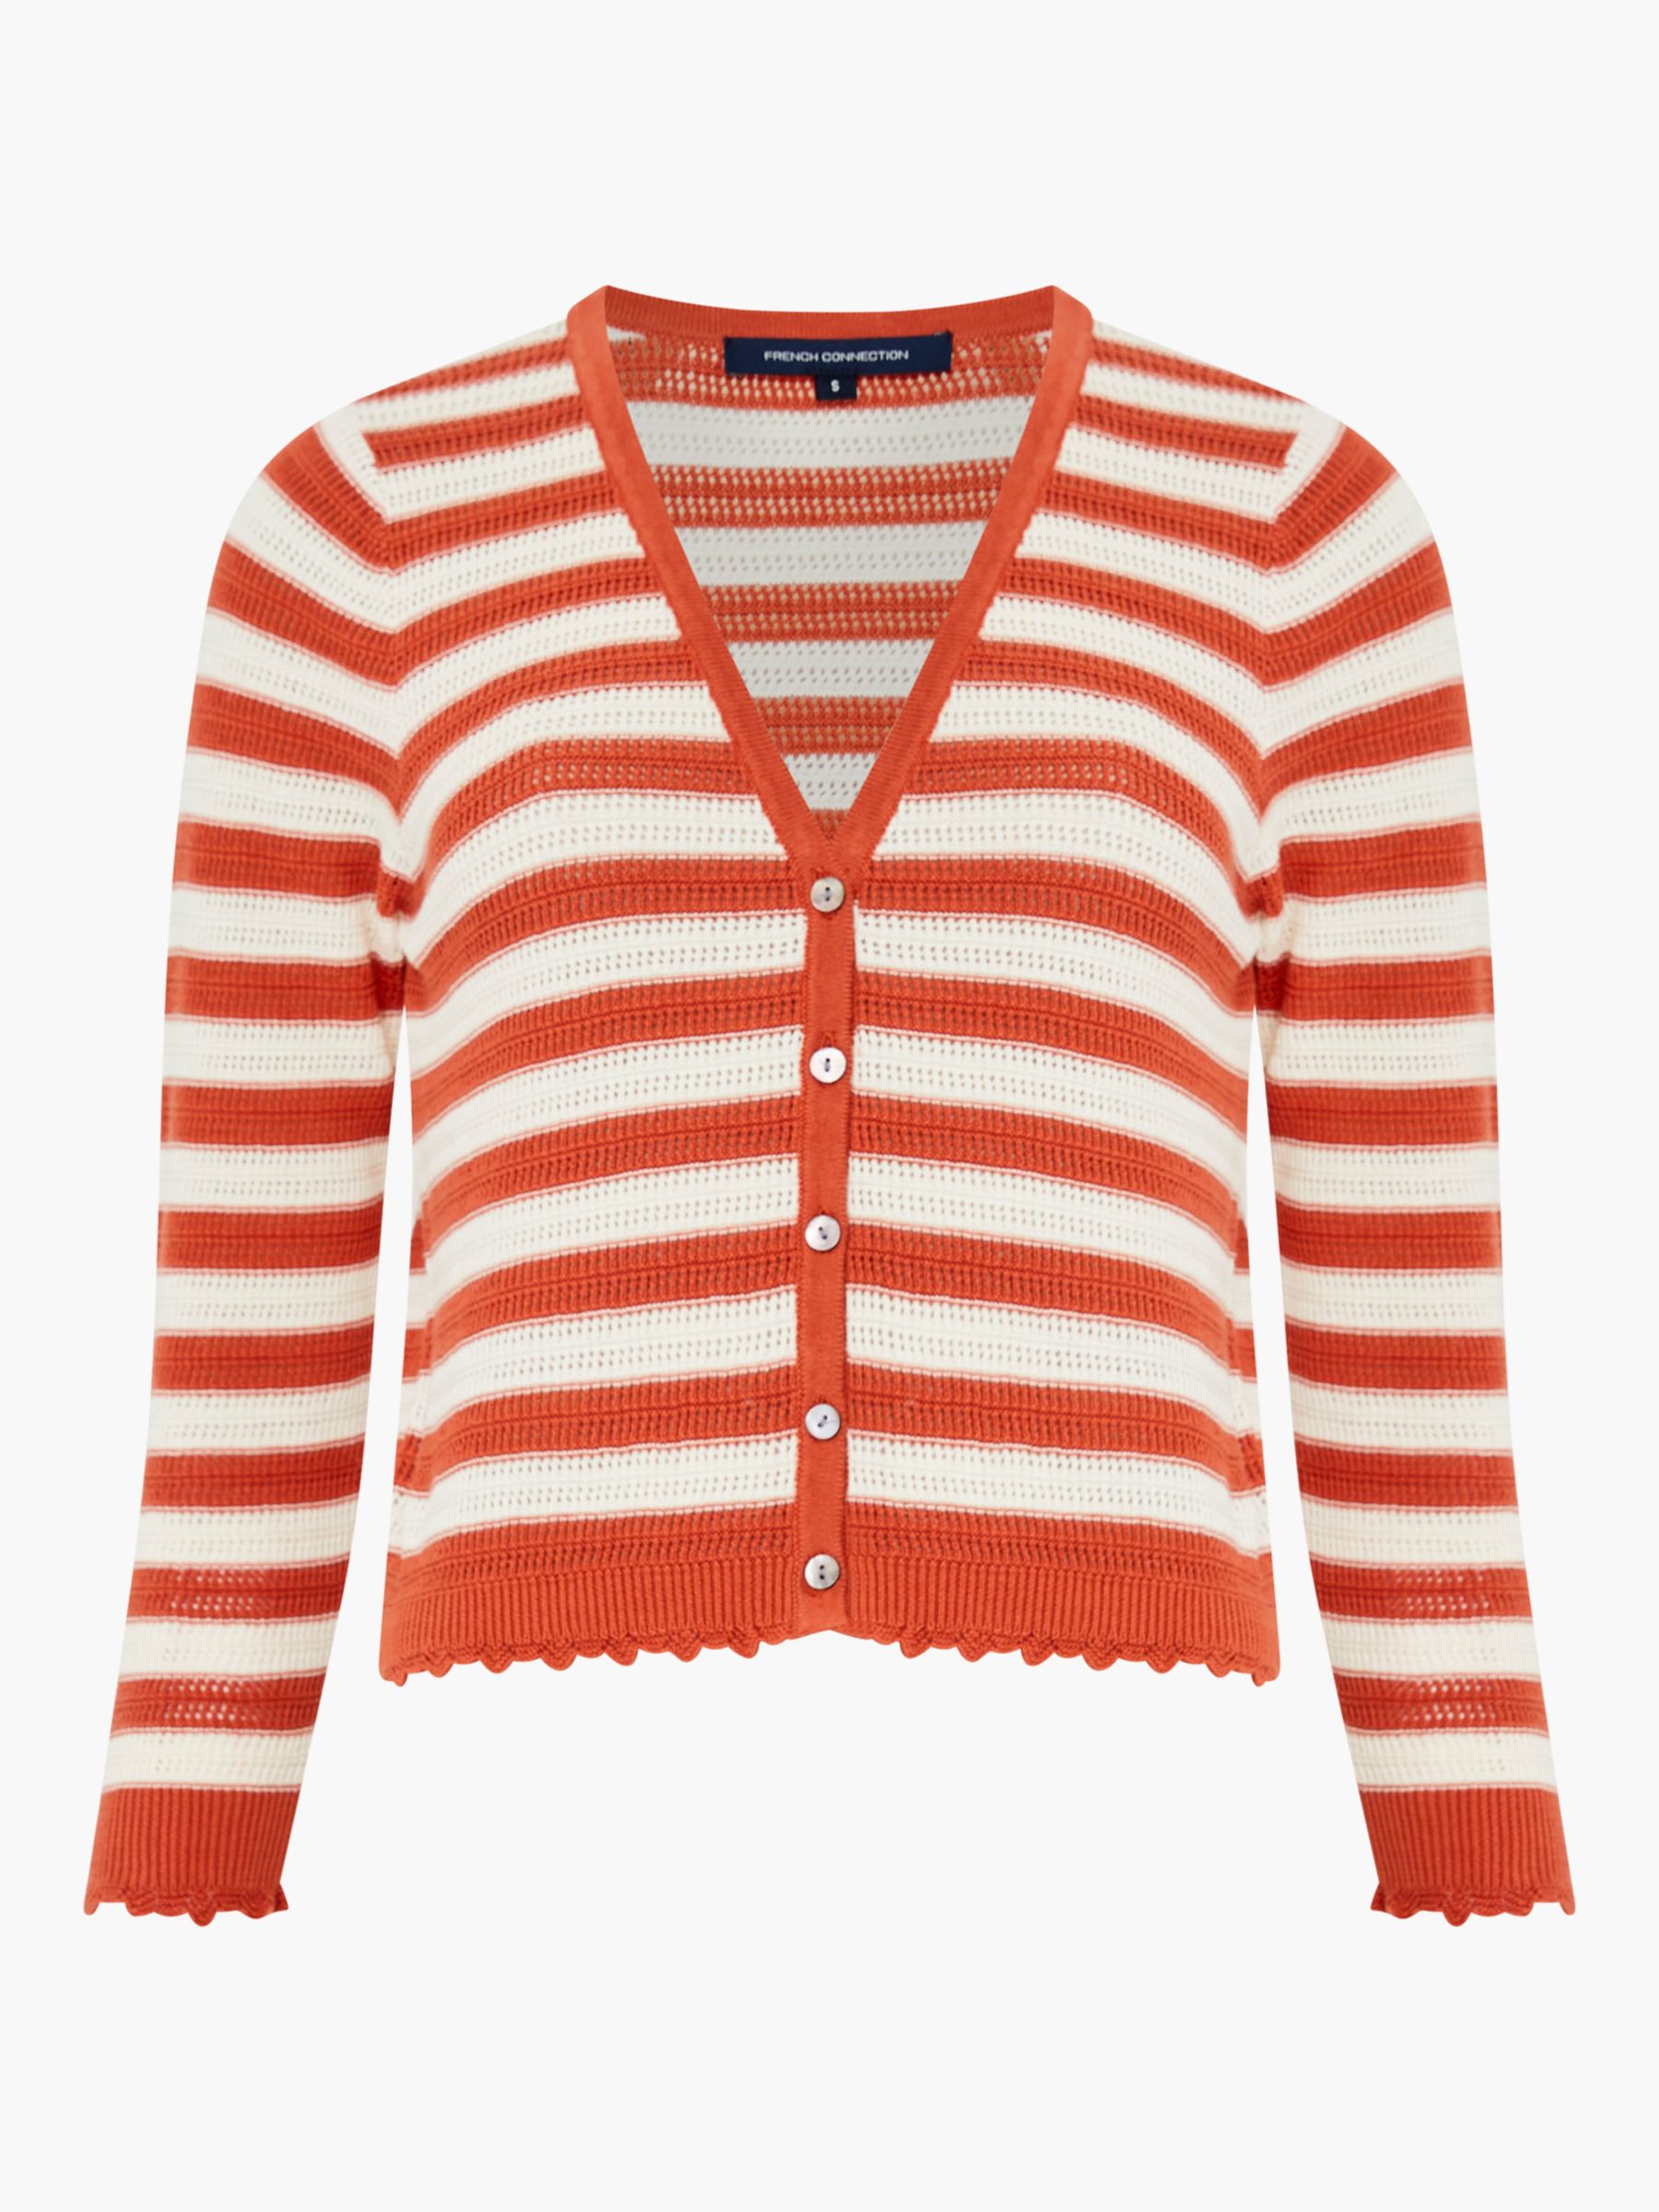 French Connection Nesta Striped Cotton Cardigan, Rosewood/Cream, XS